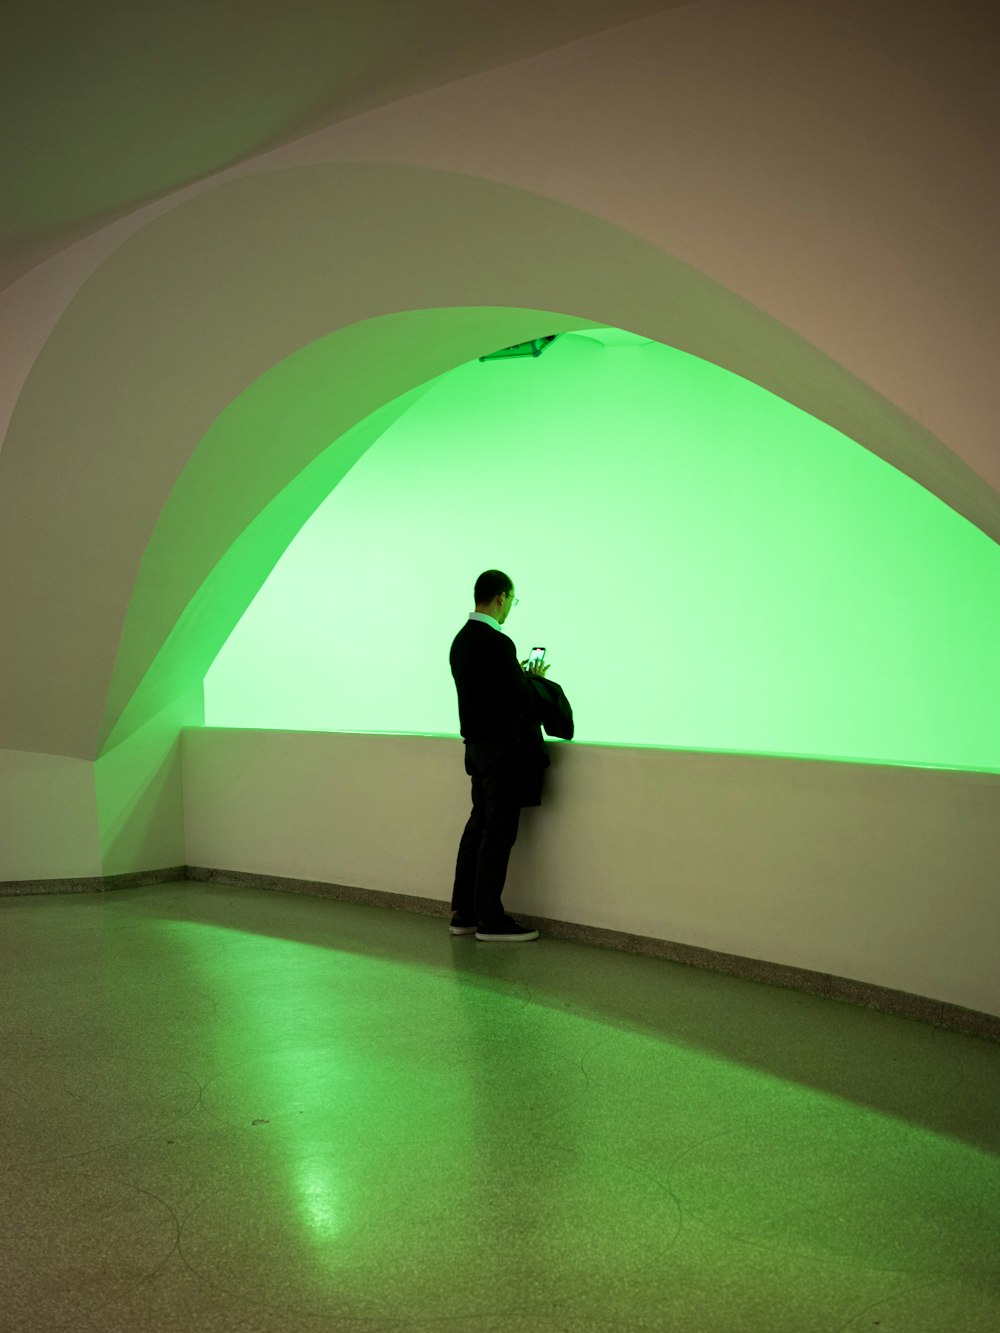 a man in a suit standing in a room with a green light